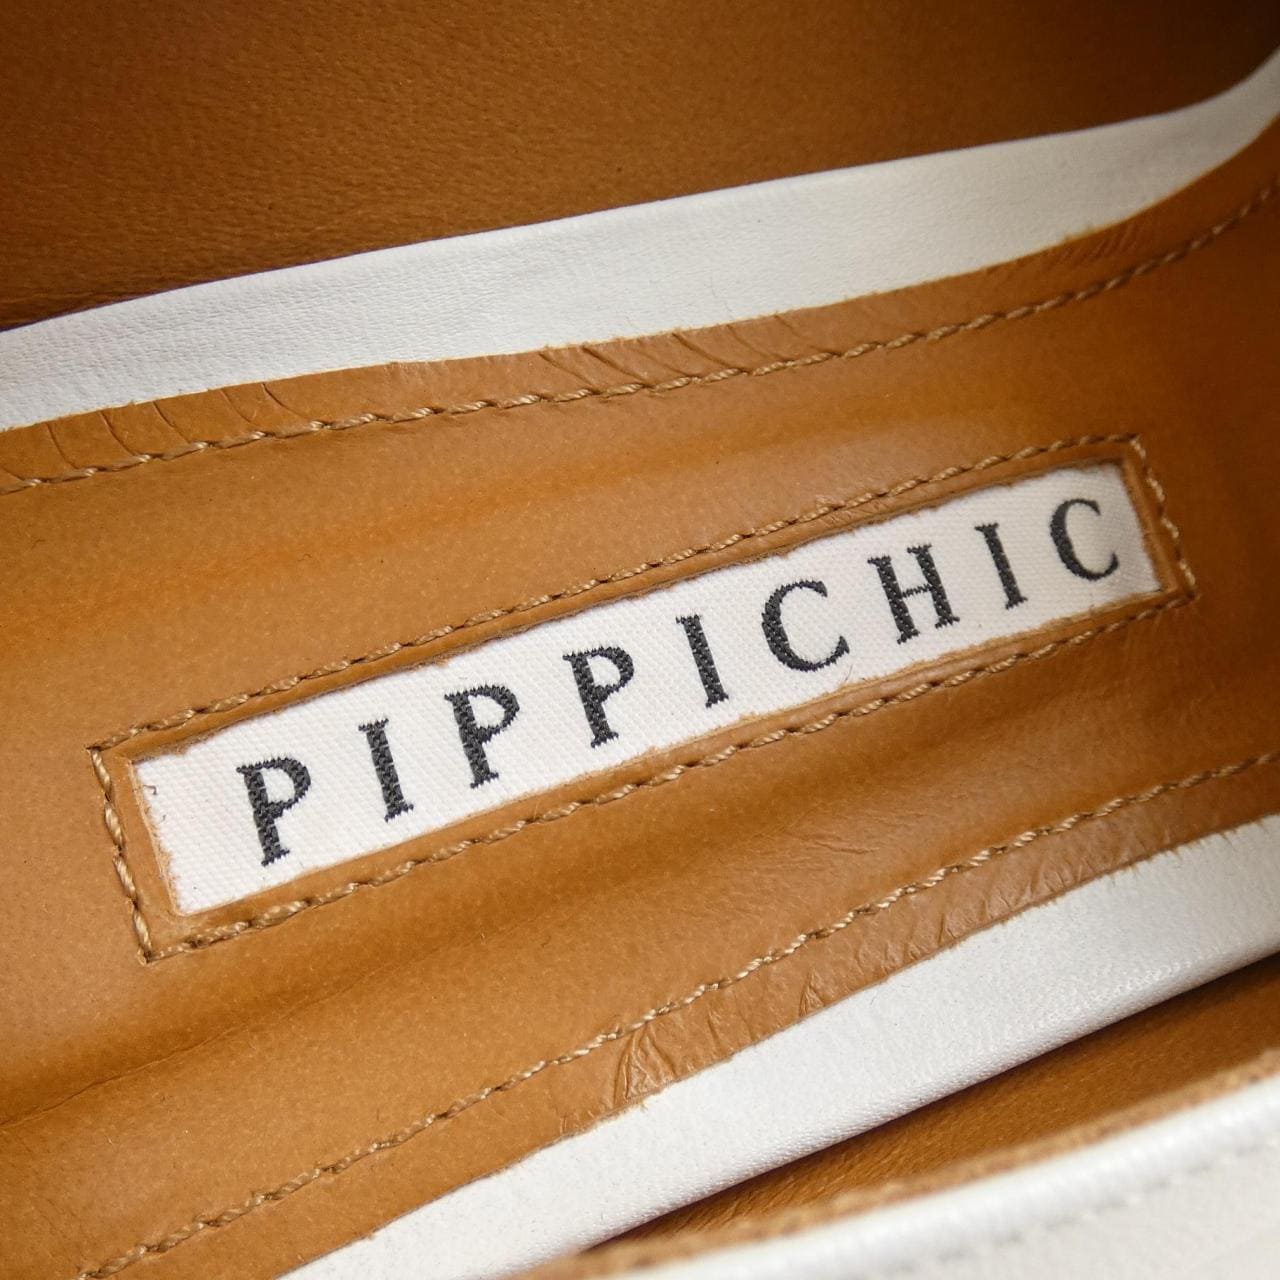 PIPPI CHIC shoes